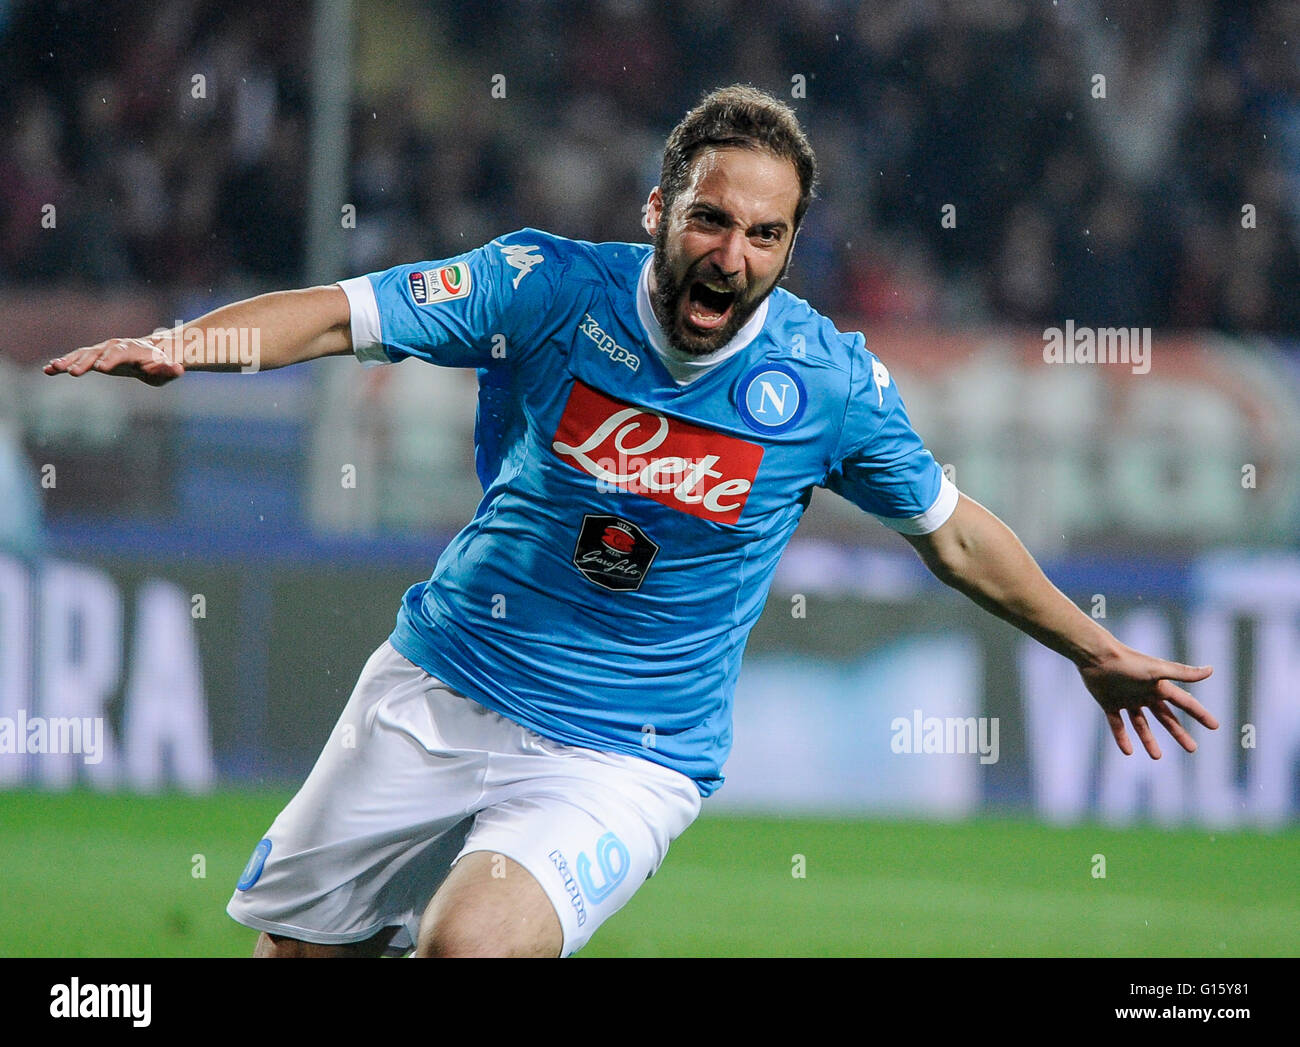 Turin, Italy. 8 may, 2016: Gonzalo Higuain celebrates after scoring during the Serie A football match between Torino FC and SSC Napoli Stock Photo